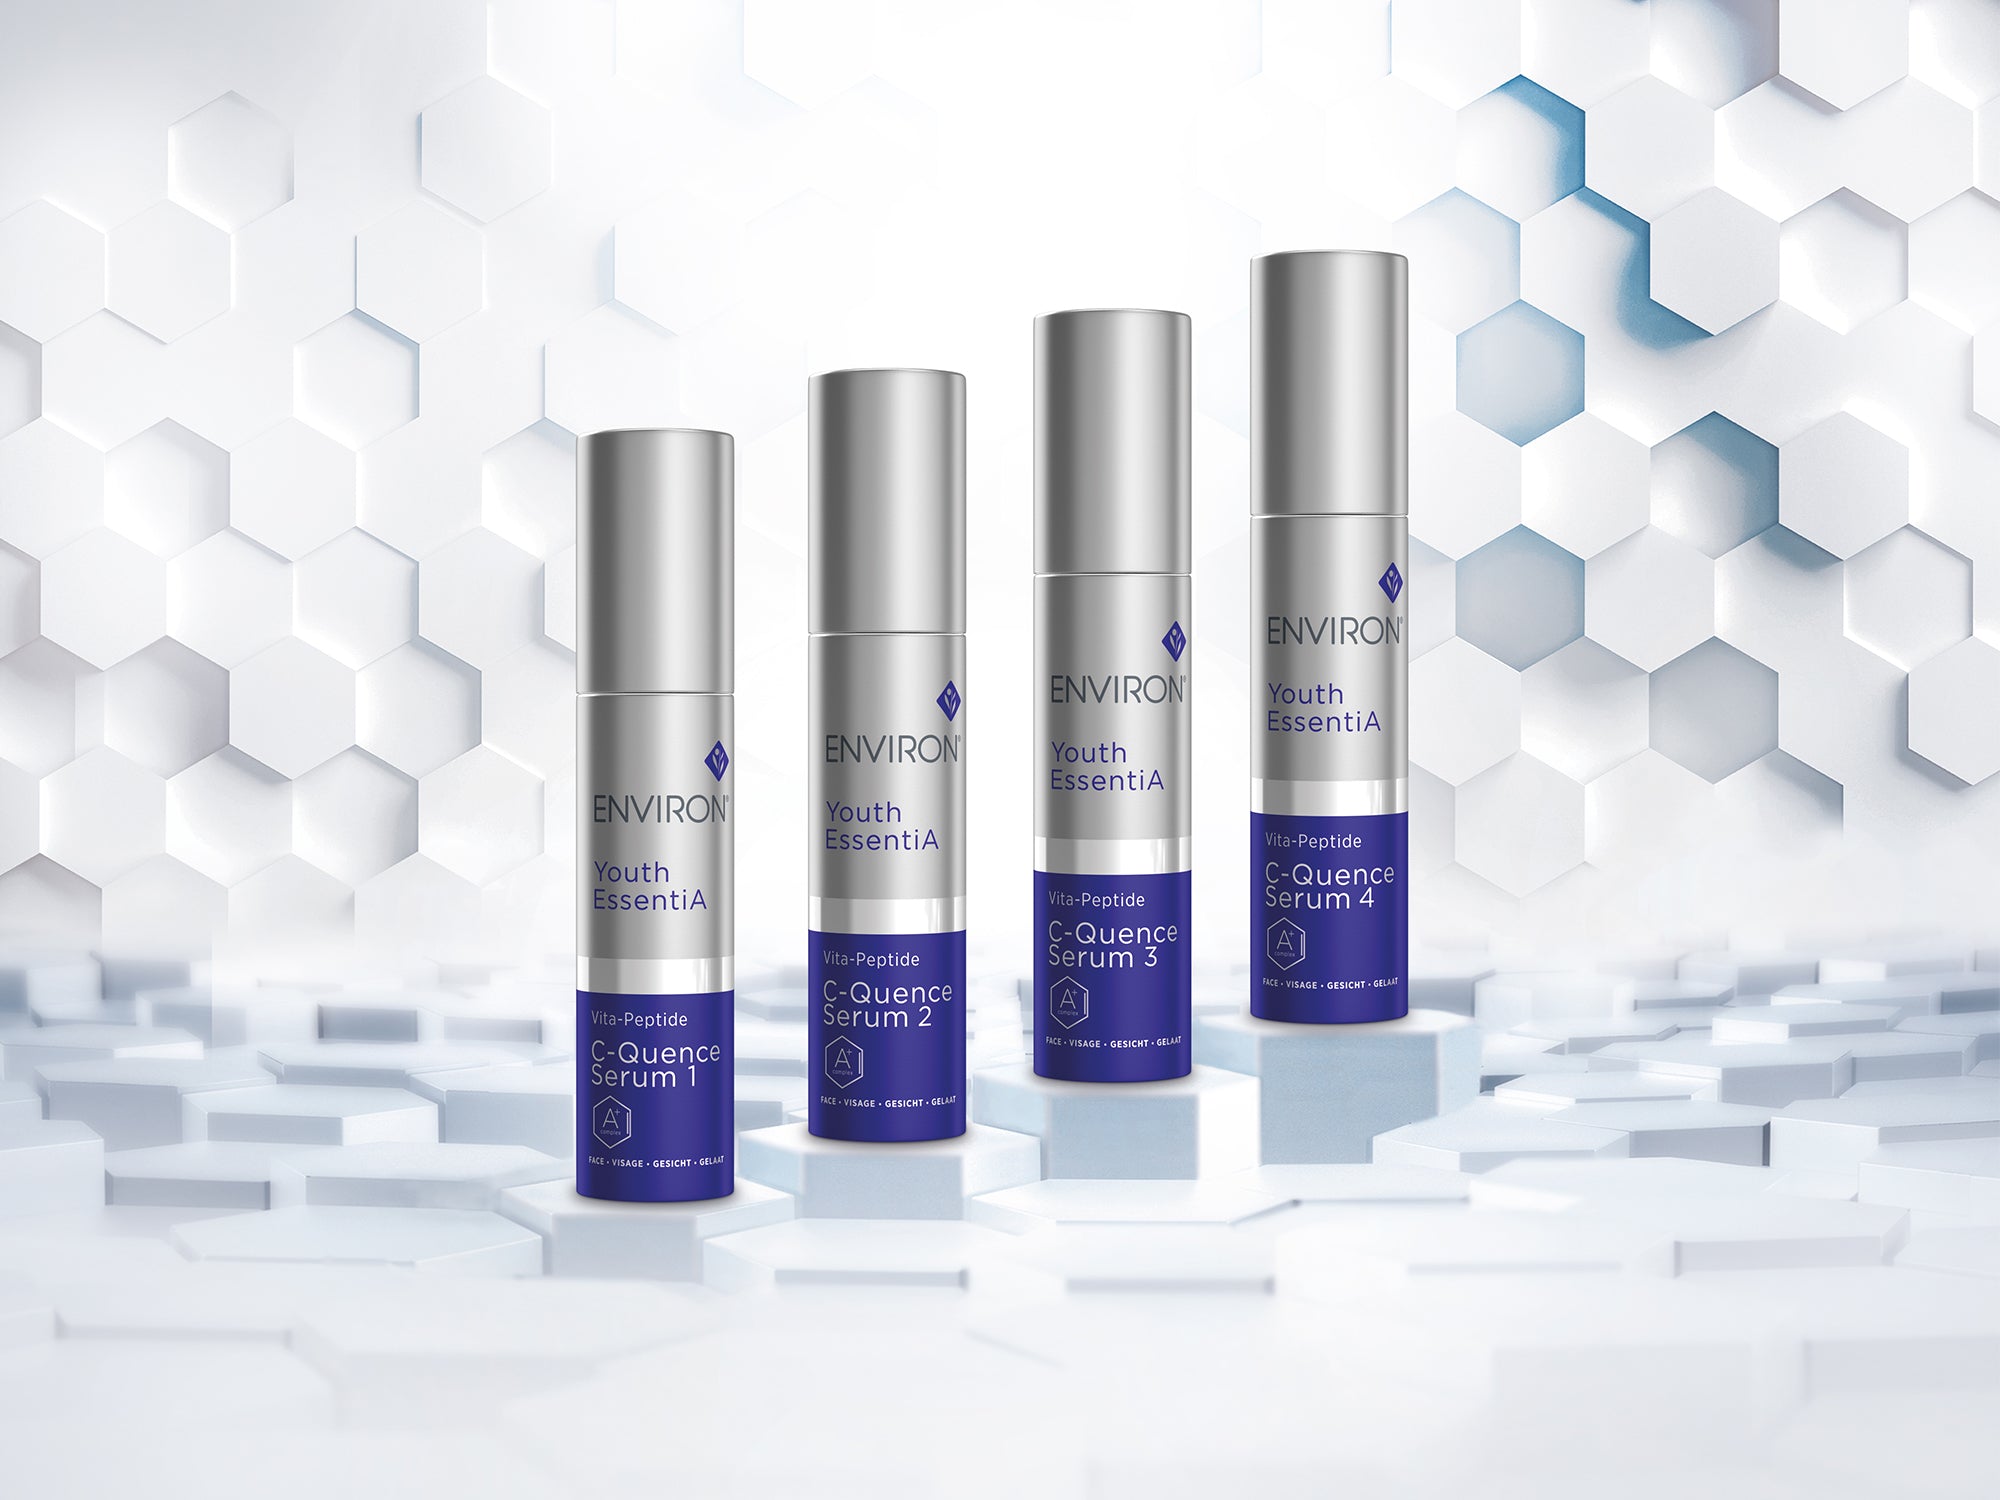 ENVIRON Youth EssentiA Vitamin Step-up System